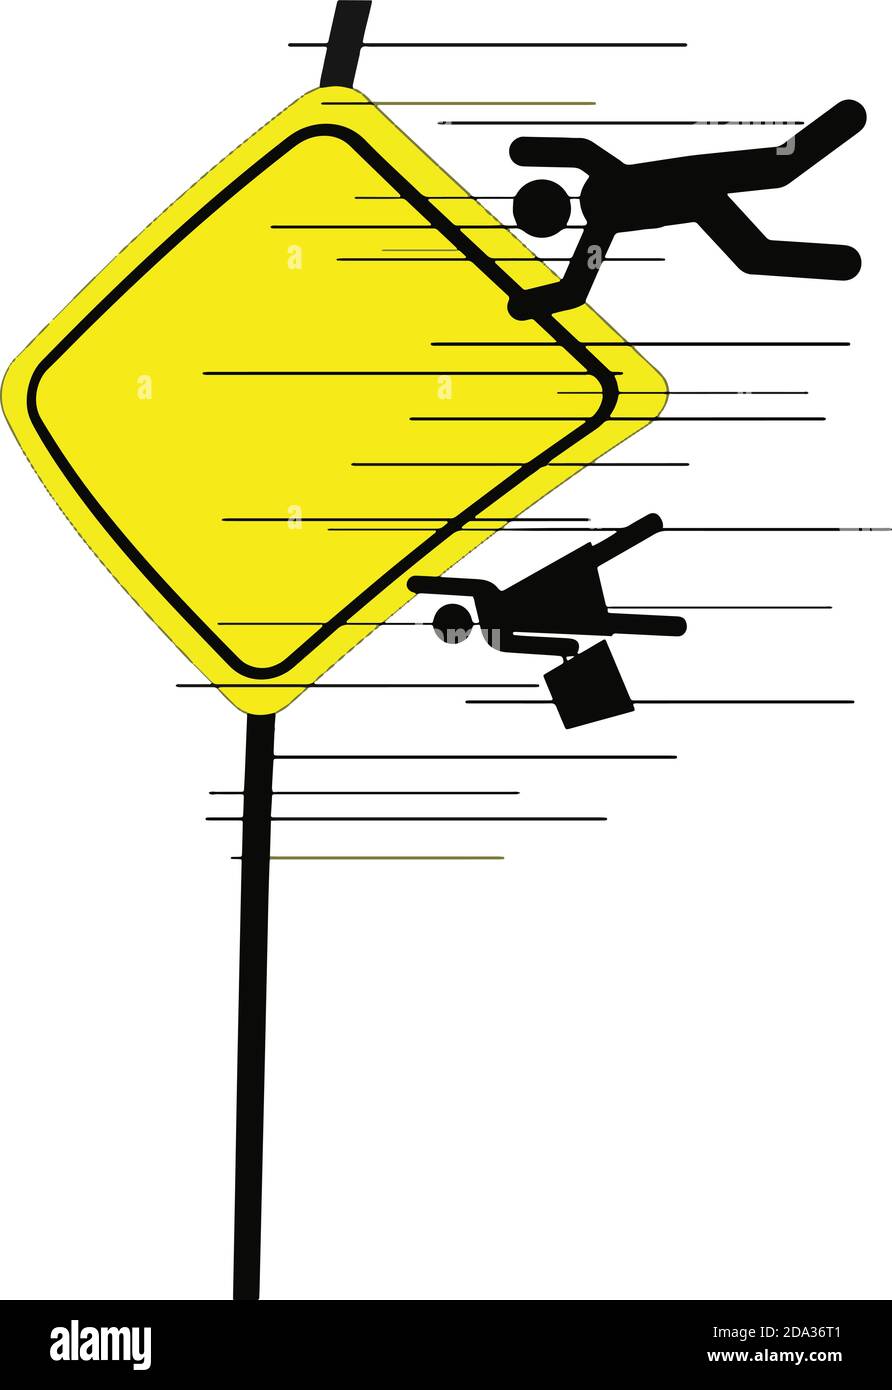 illustration vector of school area sign, with the car driving very fast so that the people in the sign blown away out of the frame Stock Vector